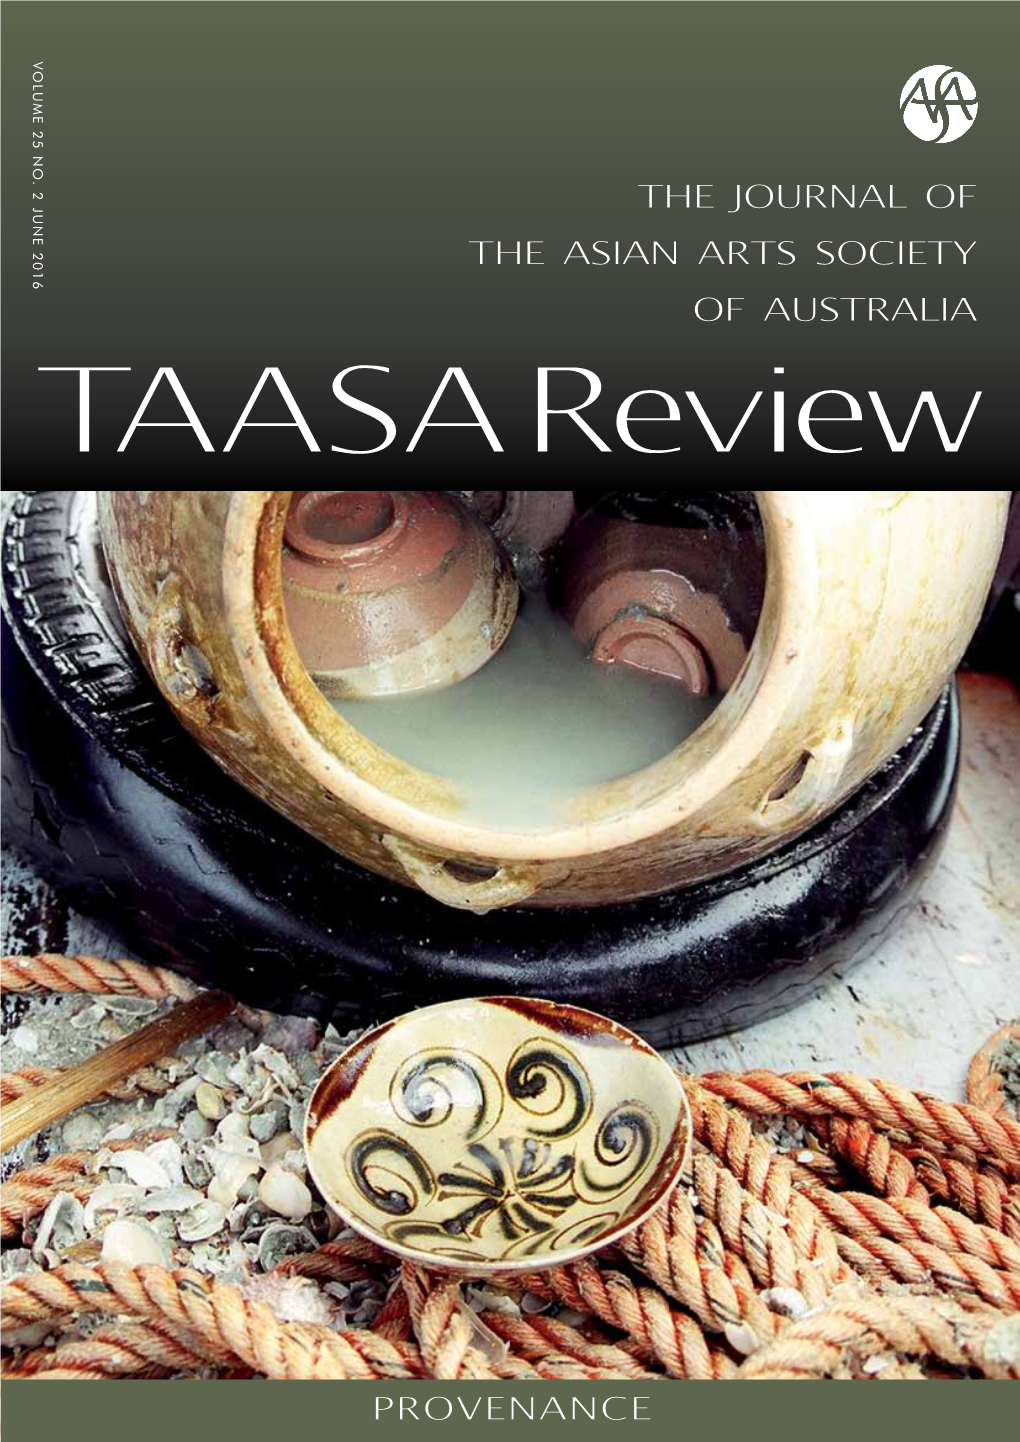 TAASA Review CONTENTS